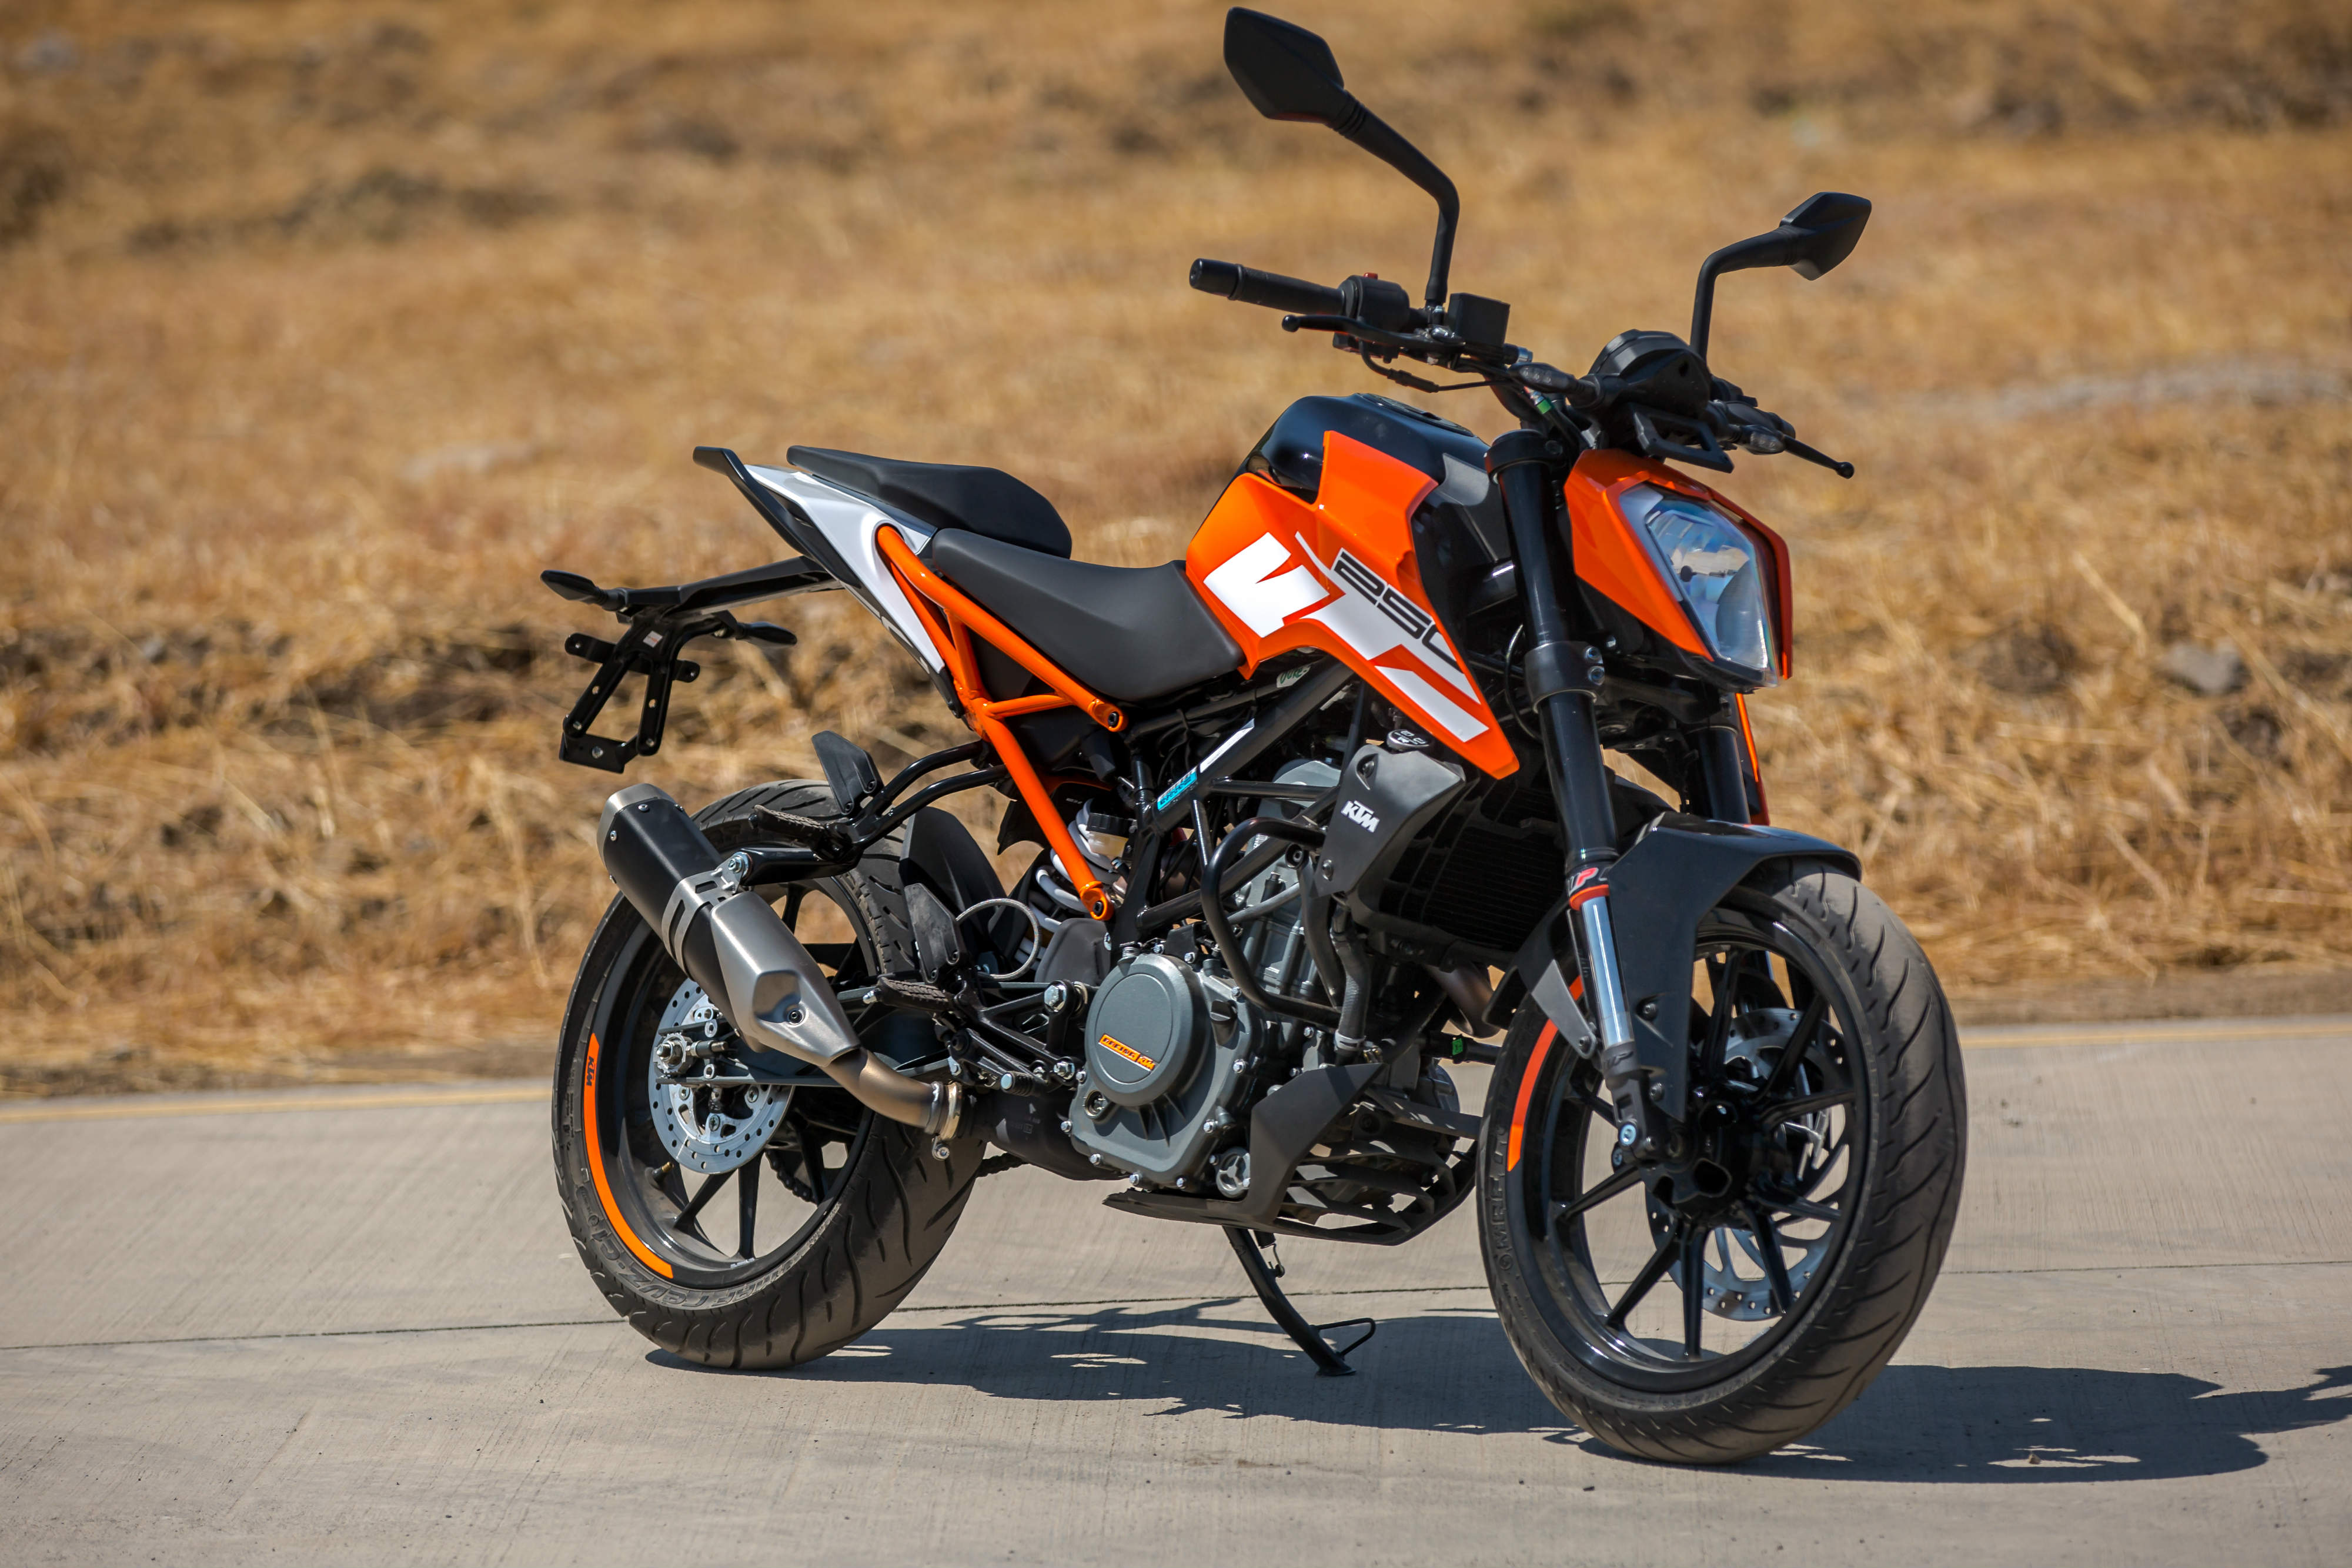 KTM 250 Duke ABS launched